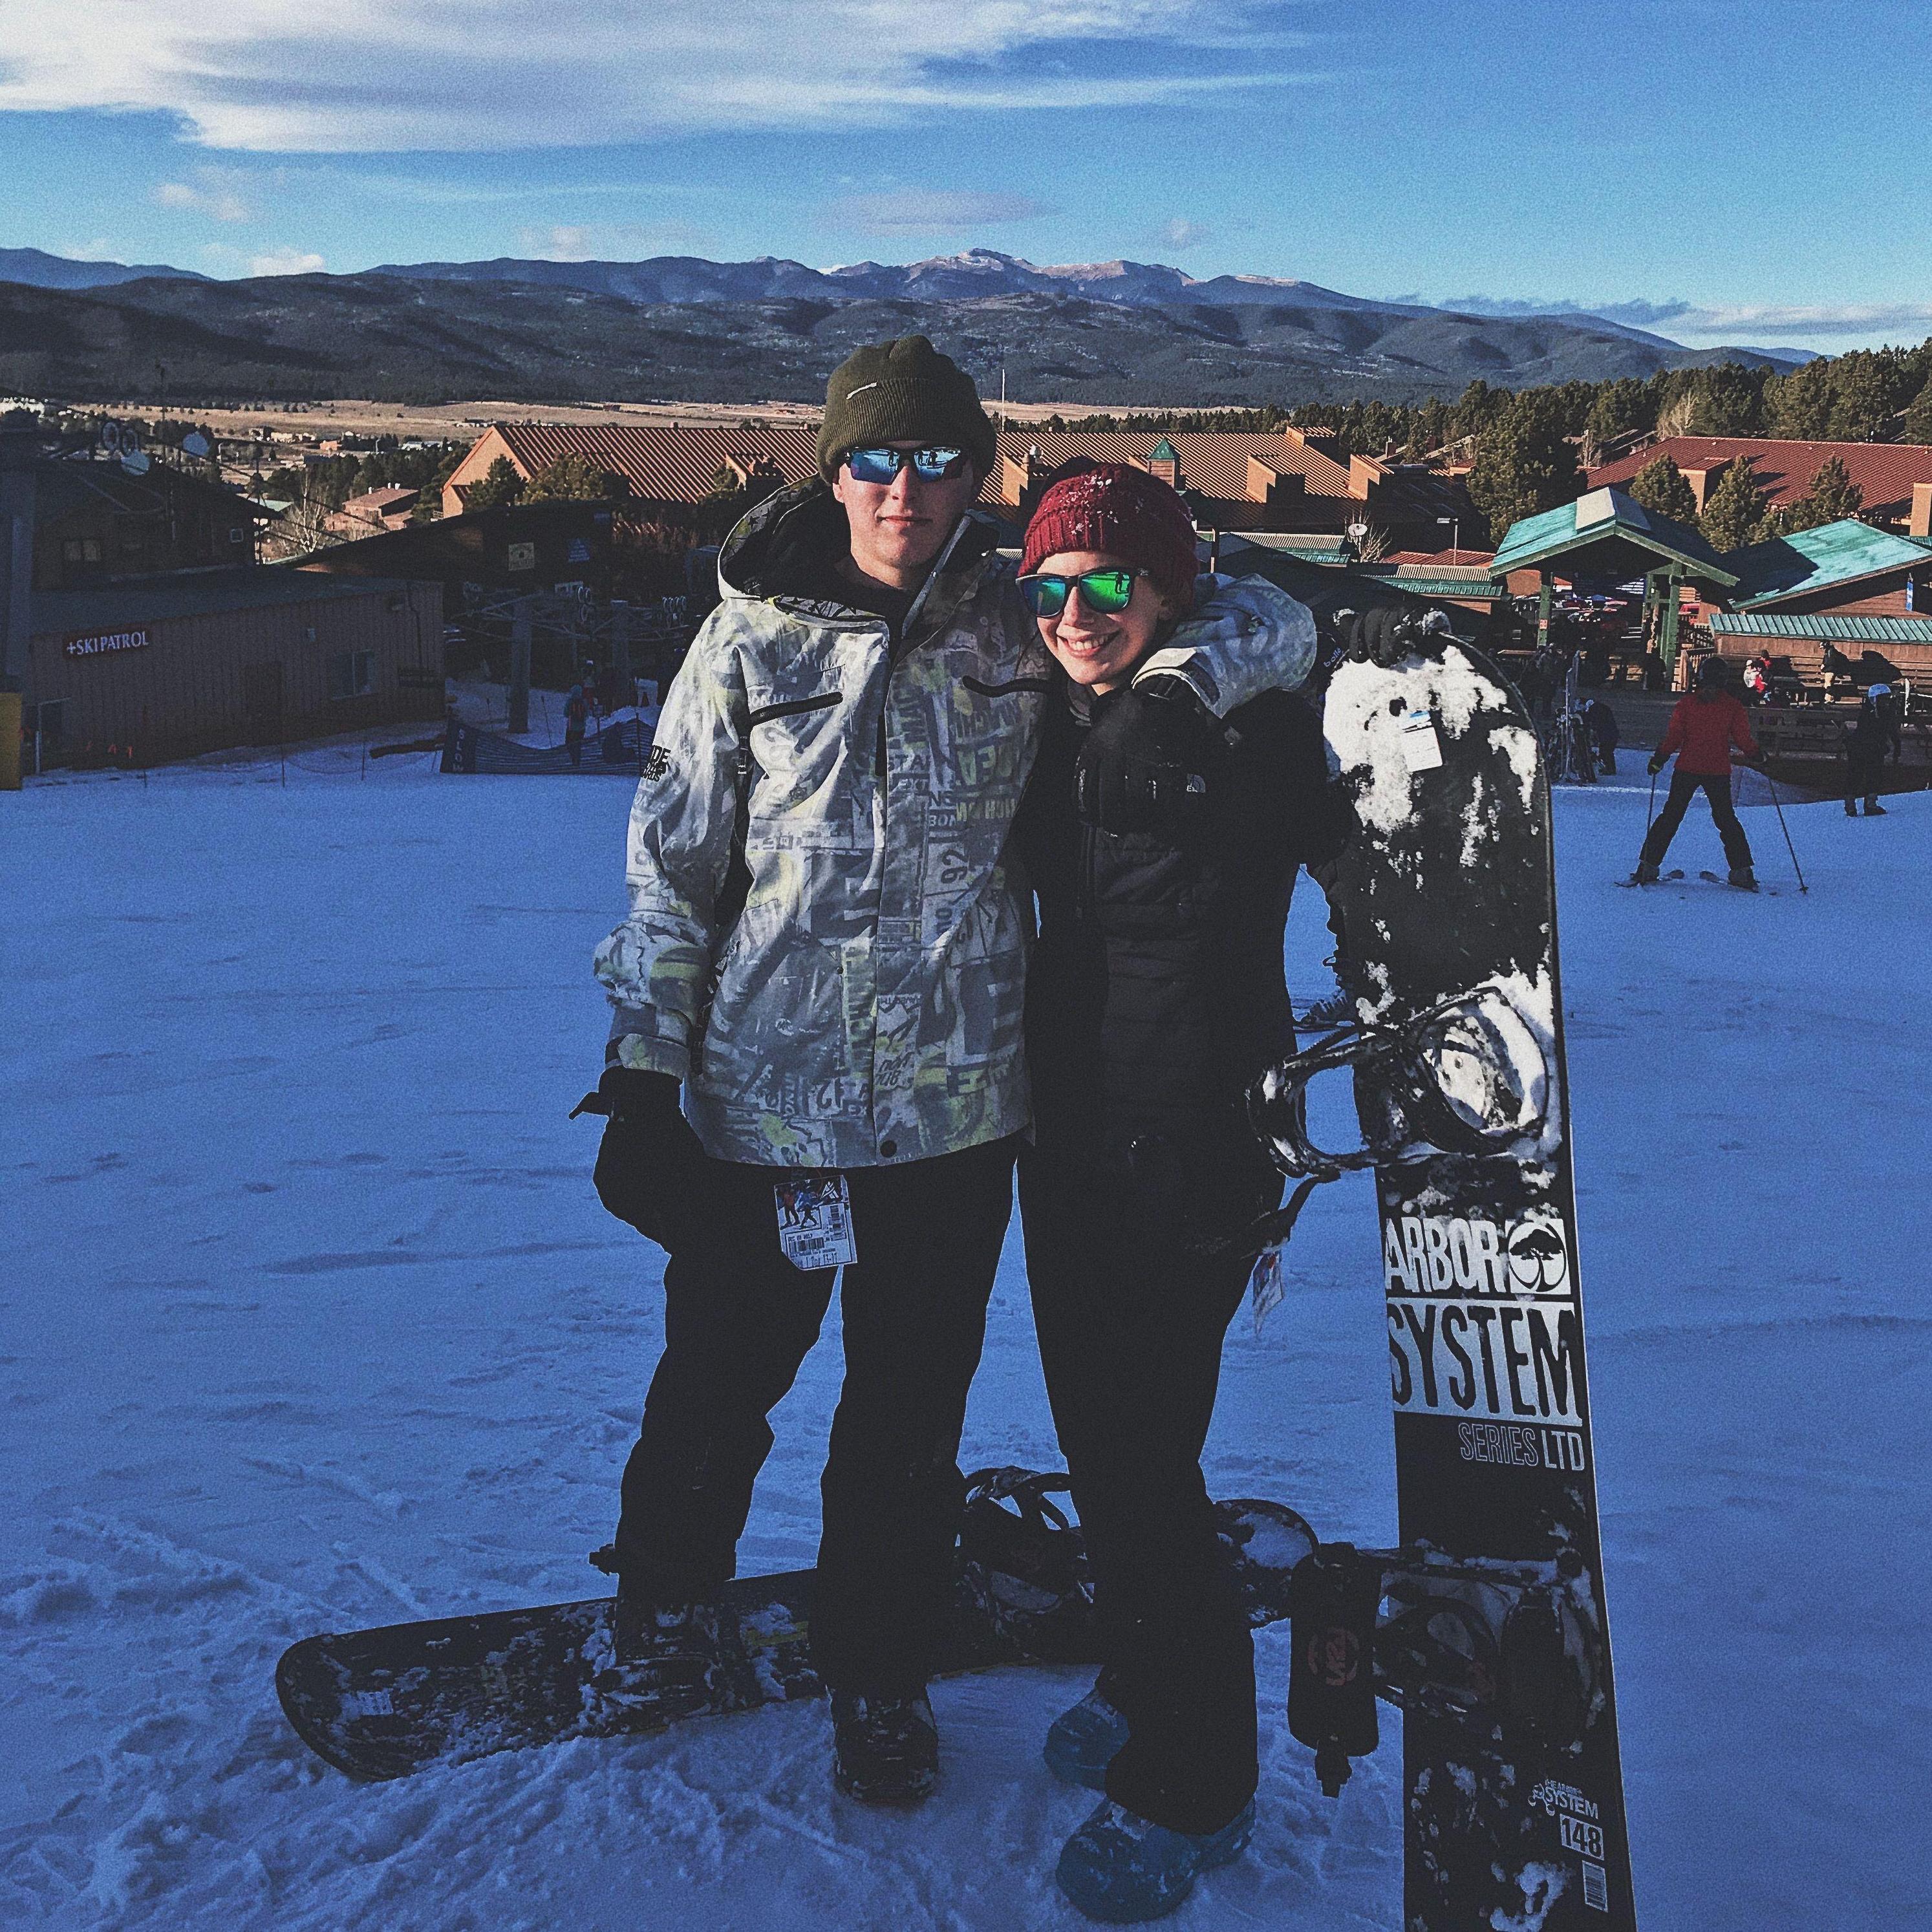 First time snow boarding! Angel Fire, NM, December 23, 2017.